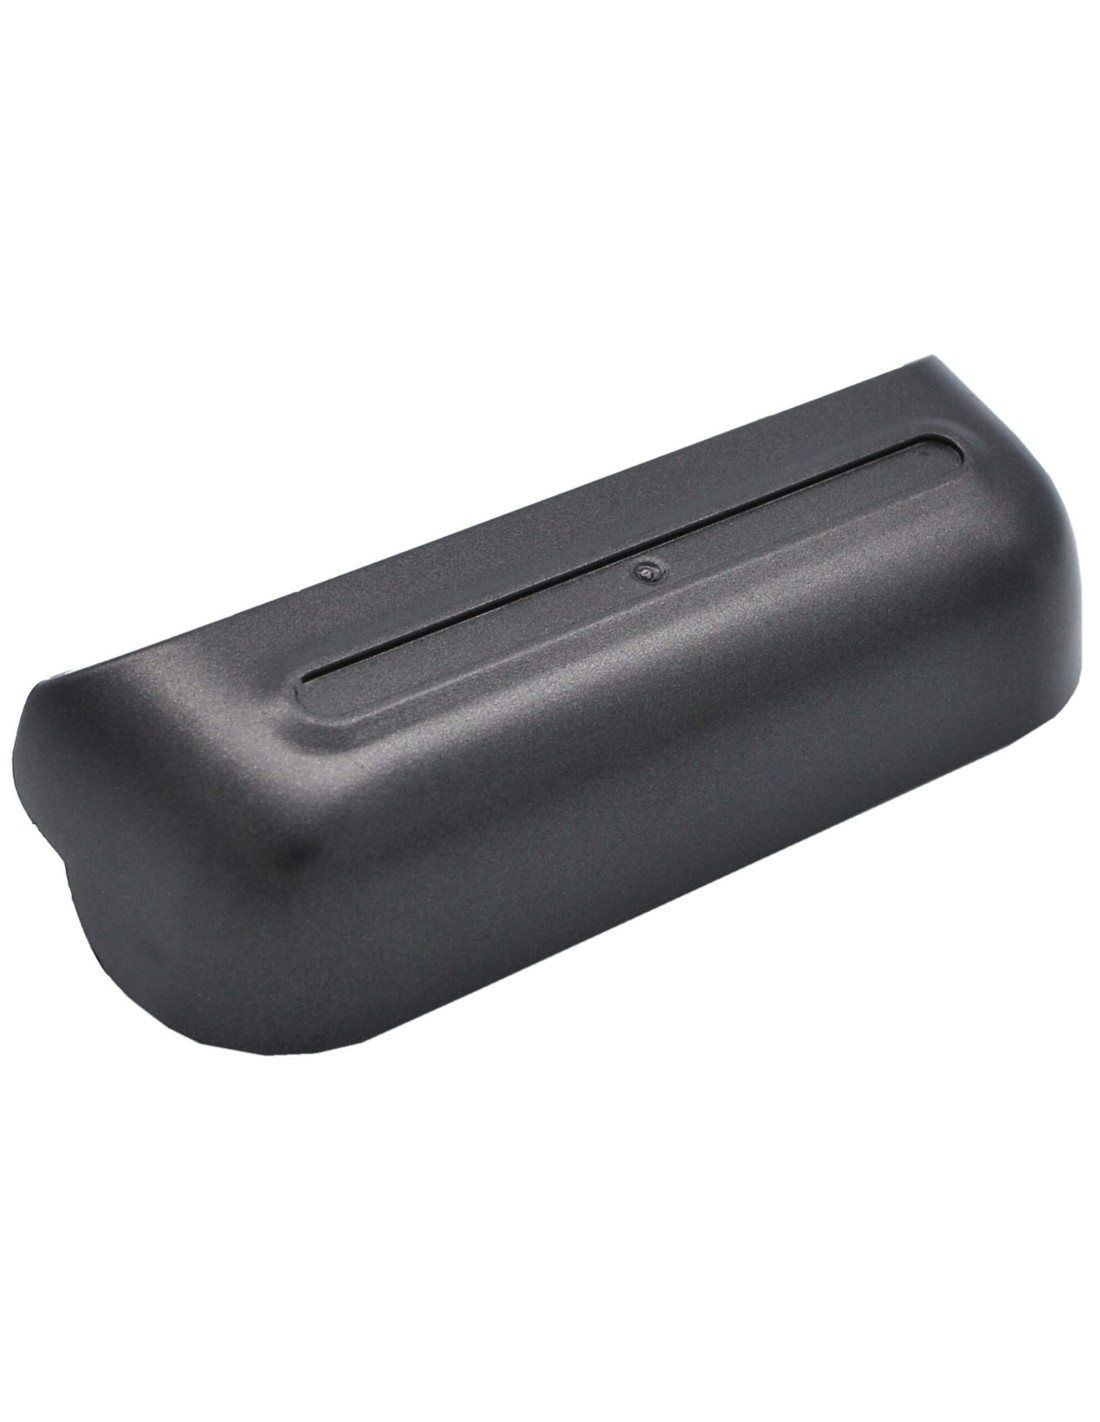 Battery for Iriver Pmc-100, Pmc-120, Pmc-140 3.7V, 2500mAh - 9.25Wh